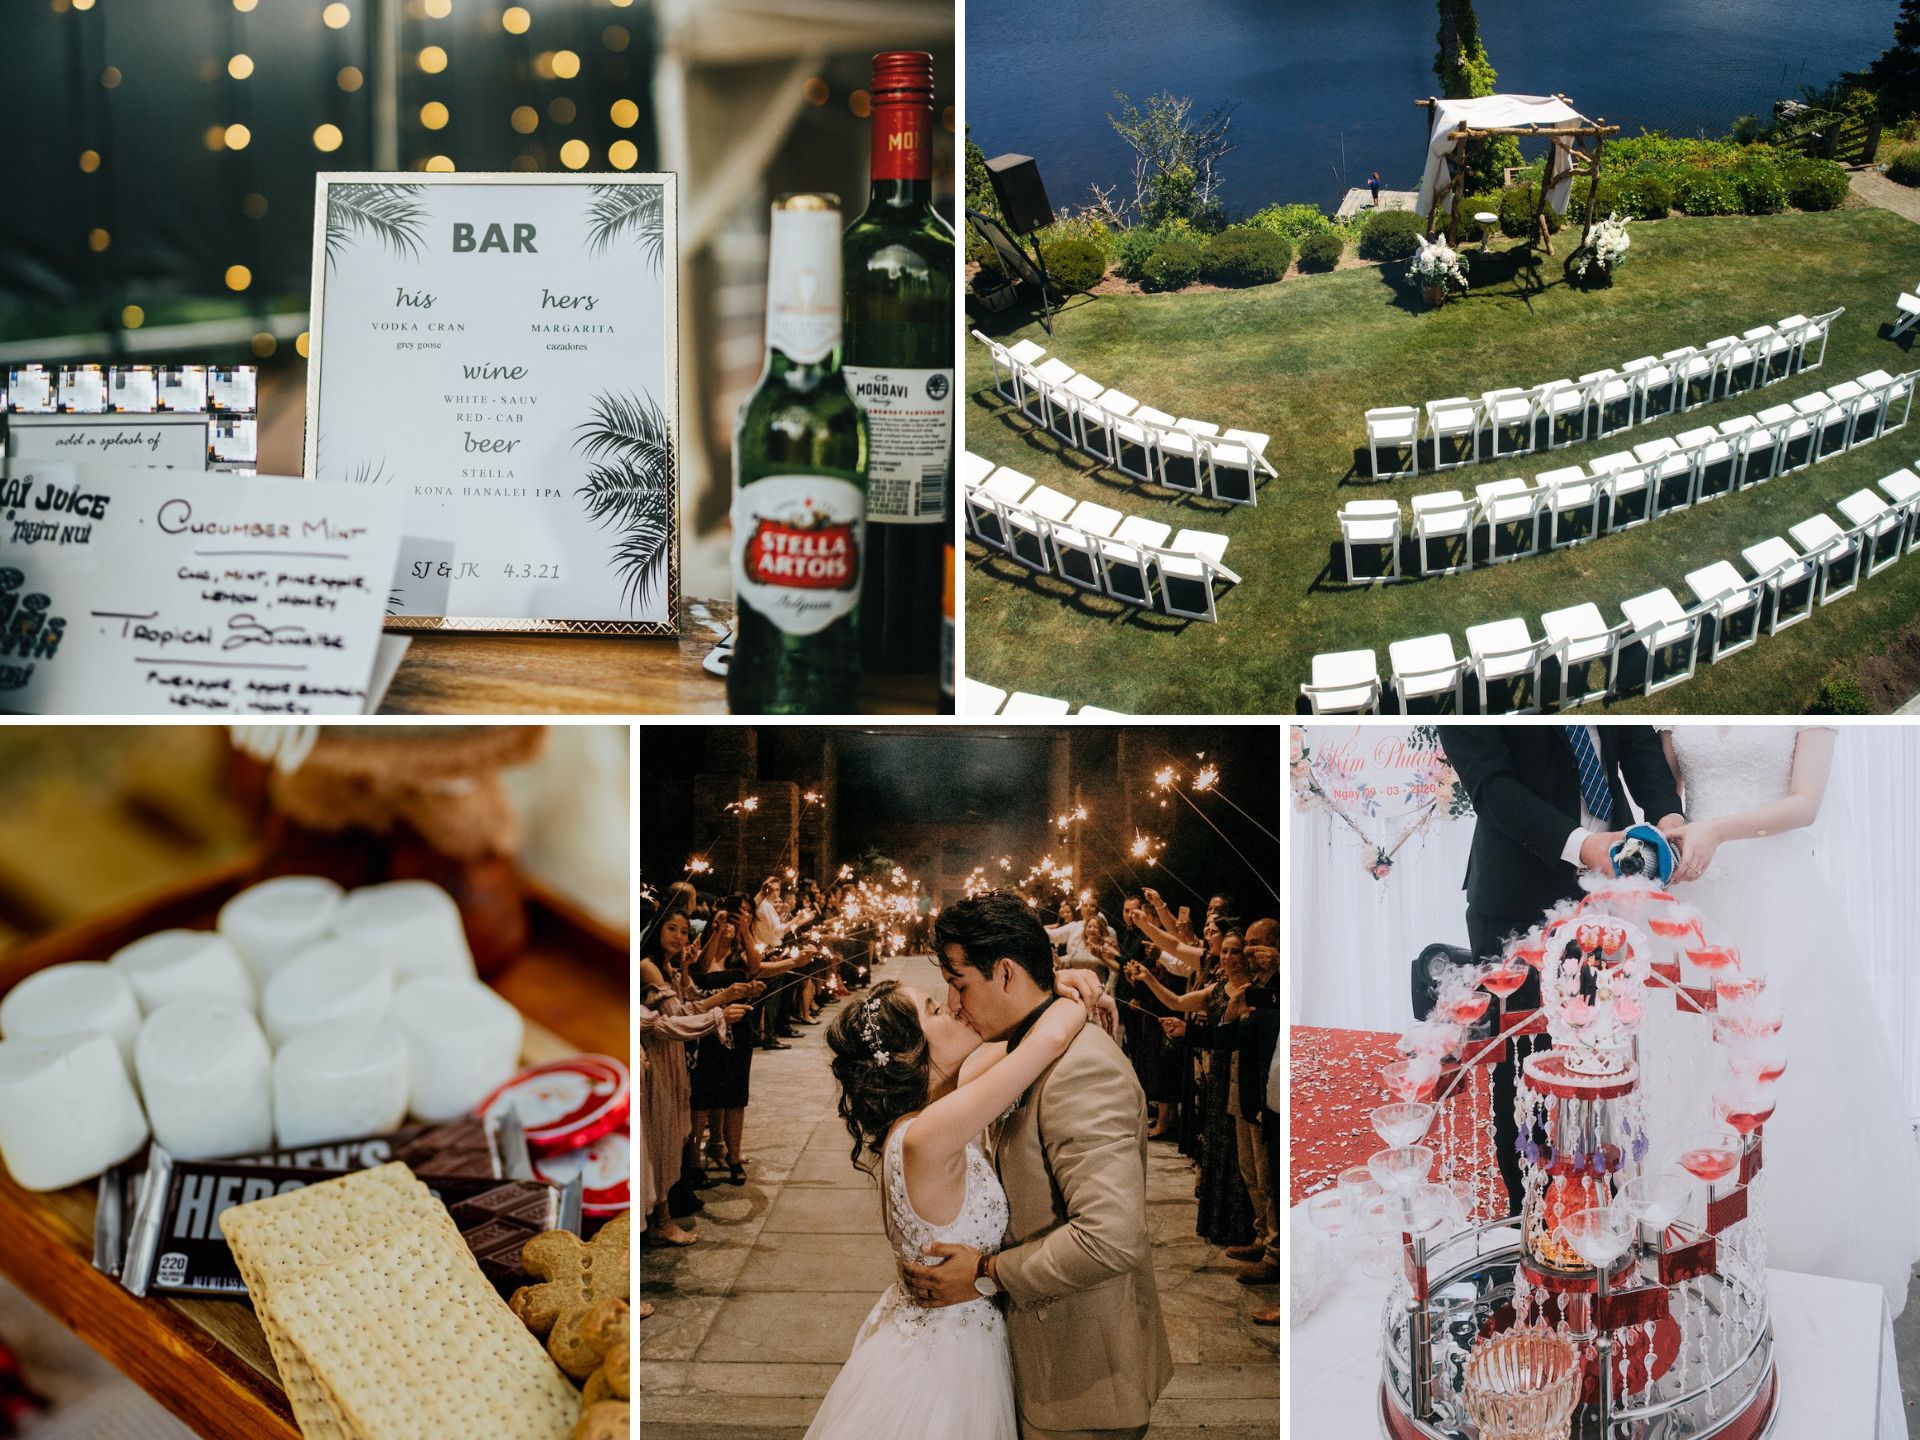 Wedding ideas guests will love.